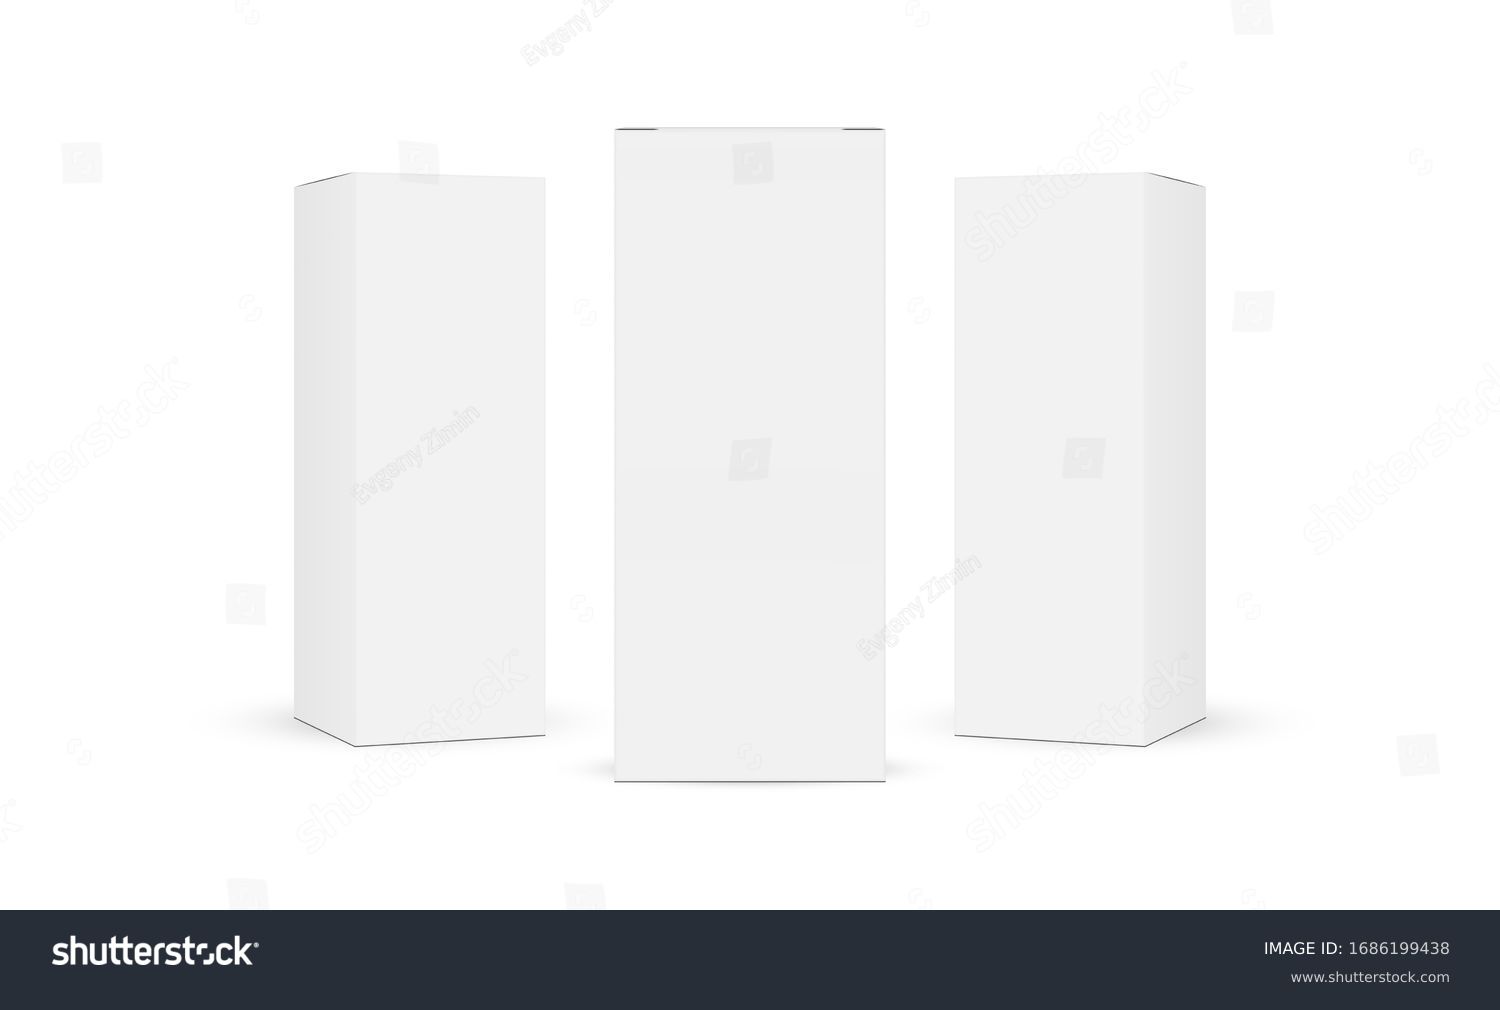 Three cardboard rectangular packaging boxes mockups isolated on white background. Vector illustration #1686199438